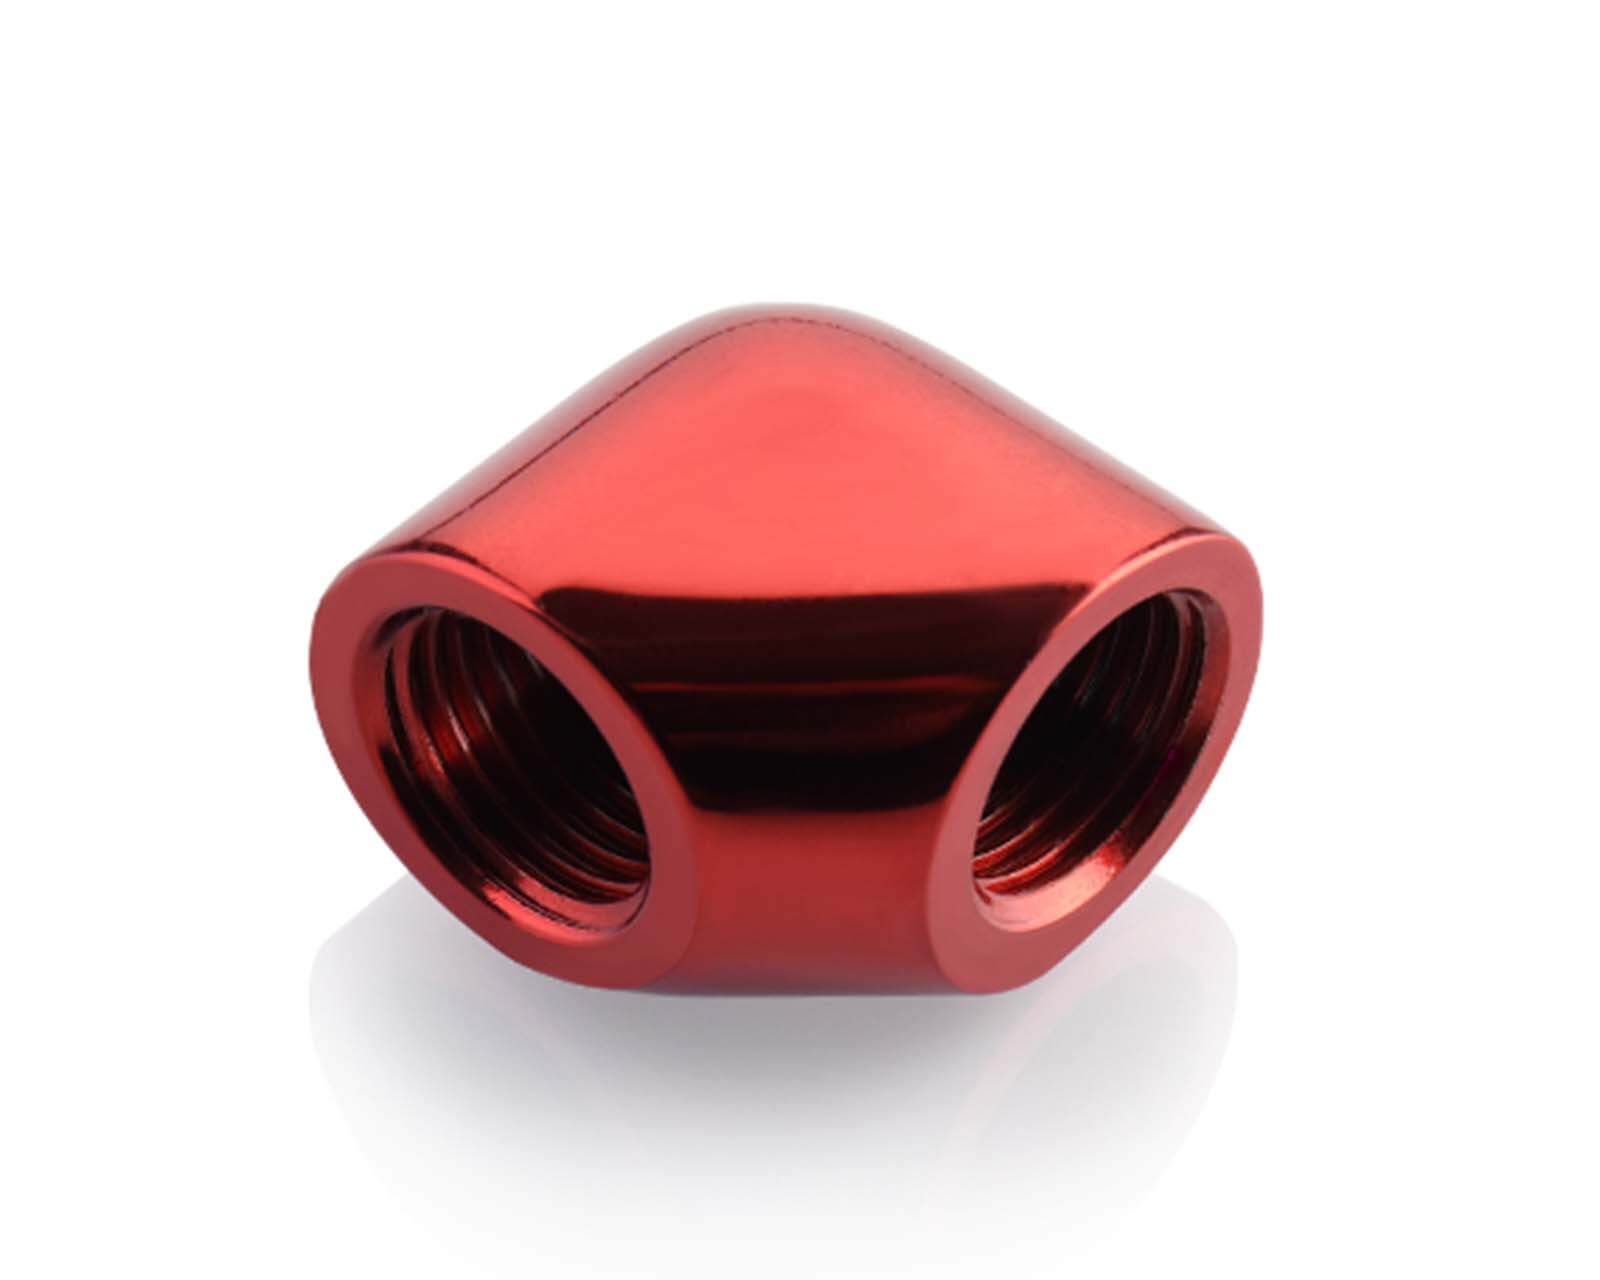 Bykski Female to Female G 1/4in. 90 Degree Extended Elbow Fitting (CC-EW90-V2) - PrimoChill - KEEPING IT COOL Red